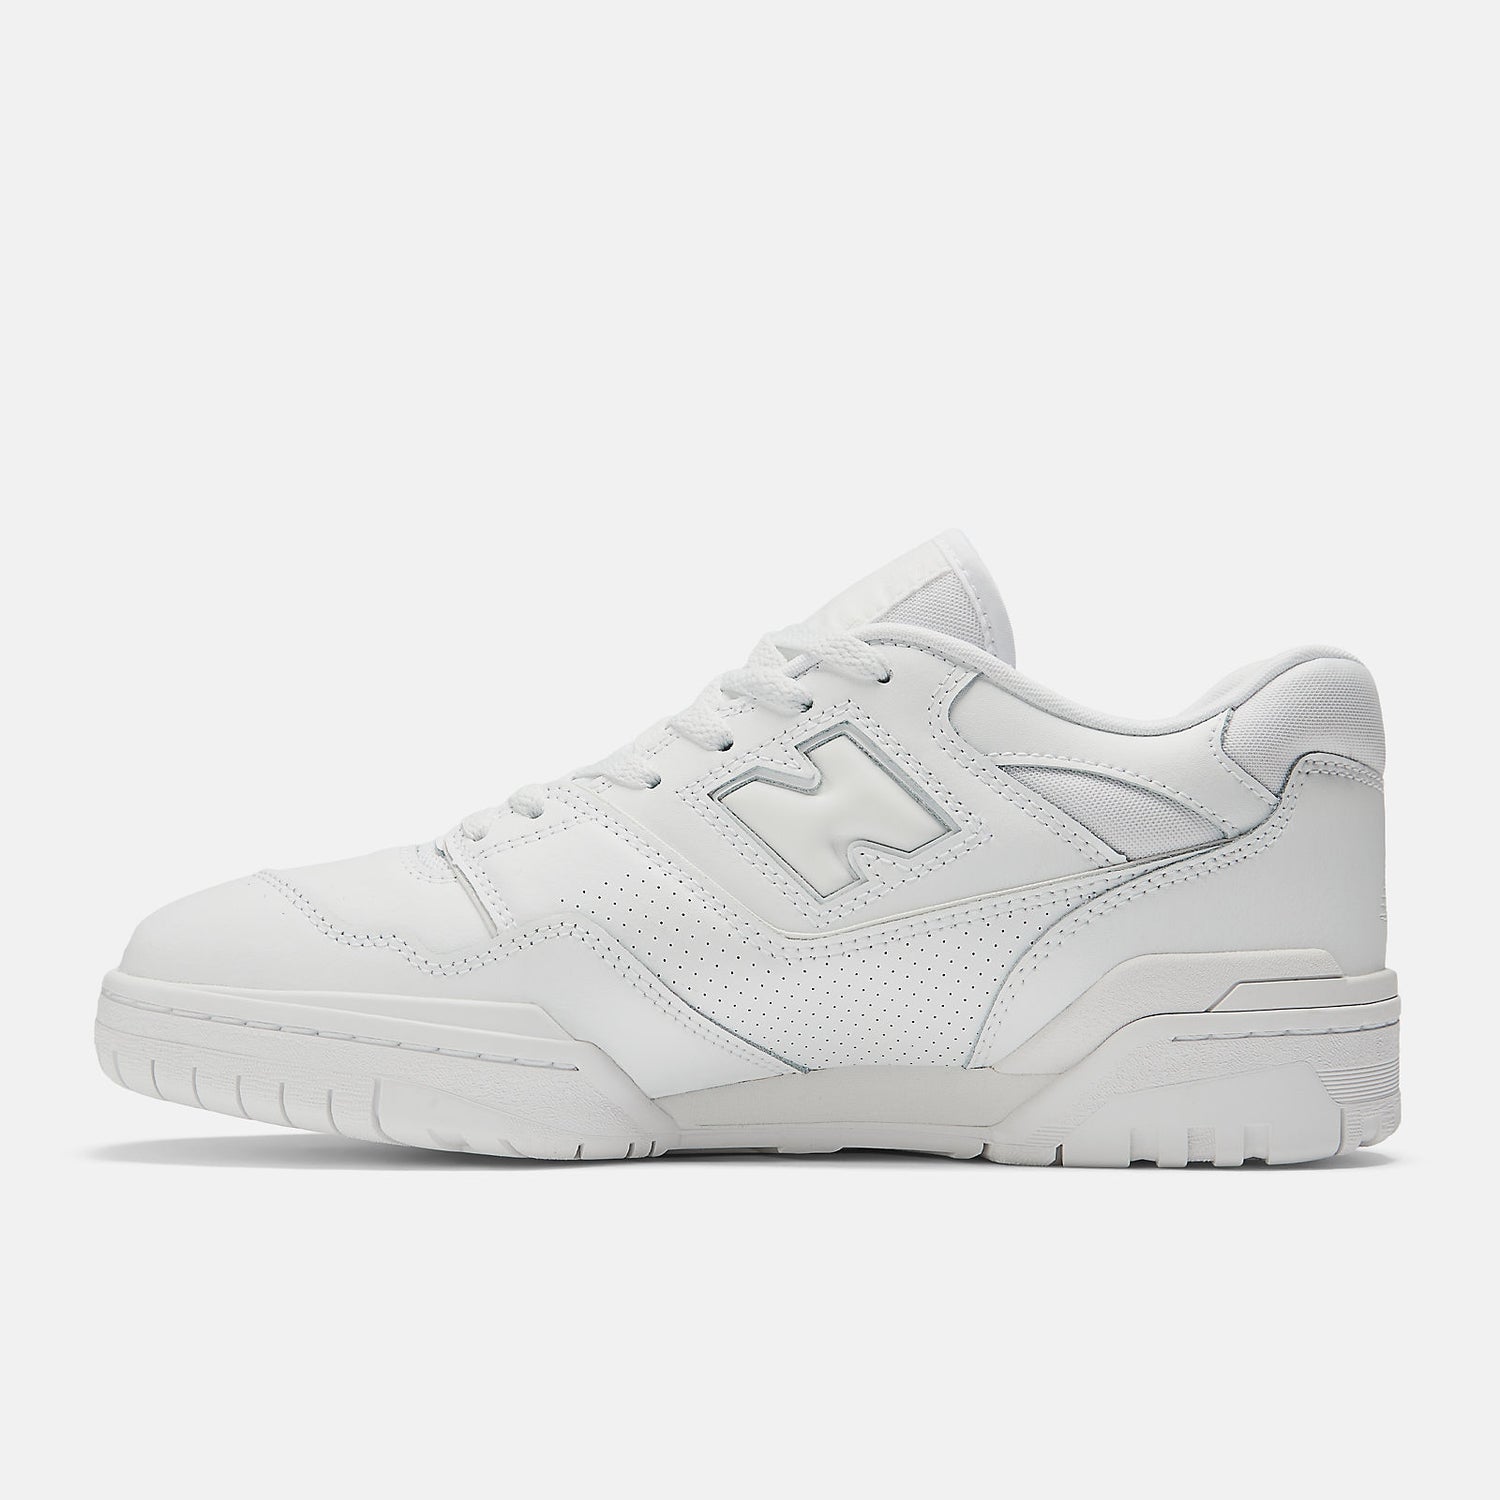 Classic New Balance 550 White Lacrosse Shoes  - Left front 